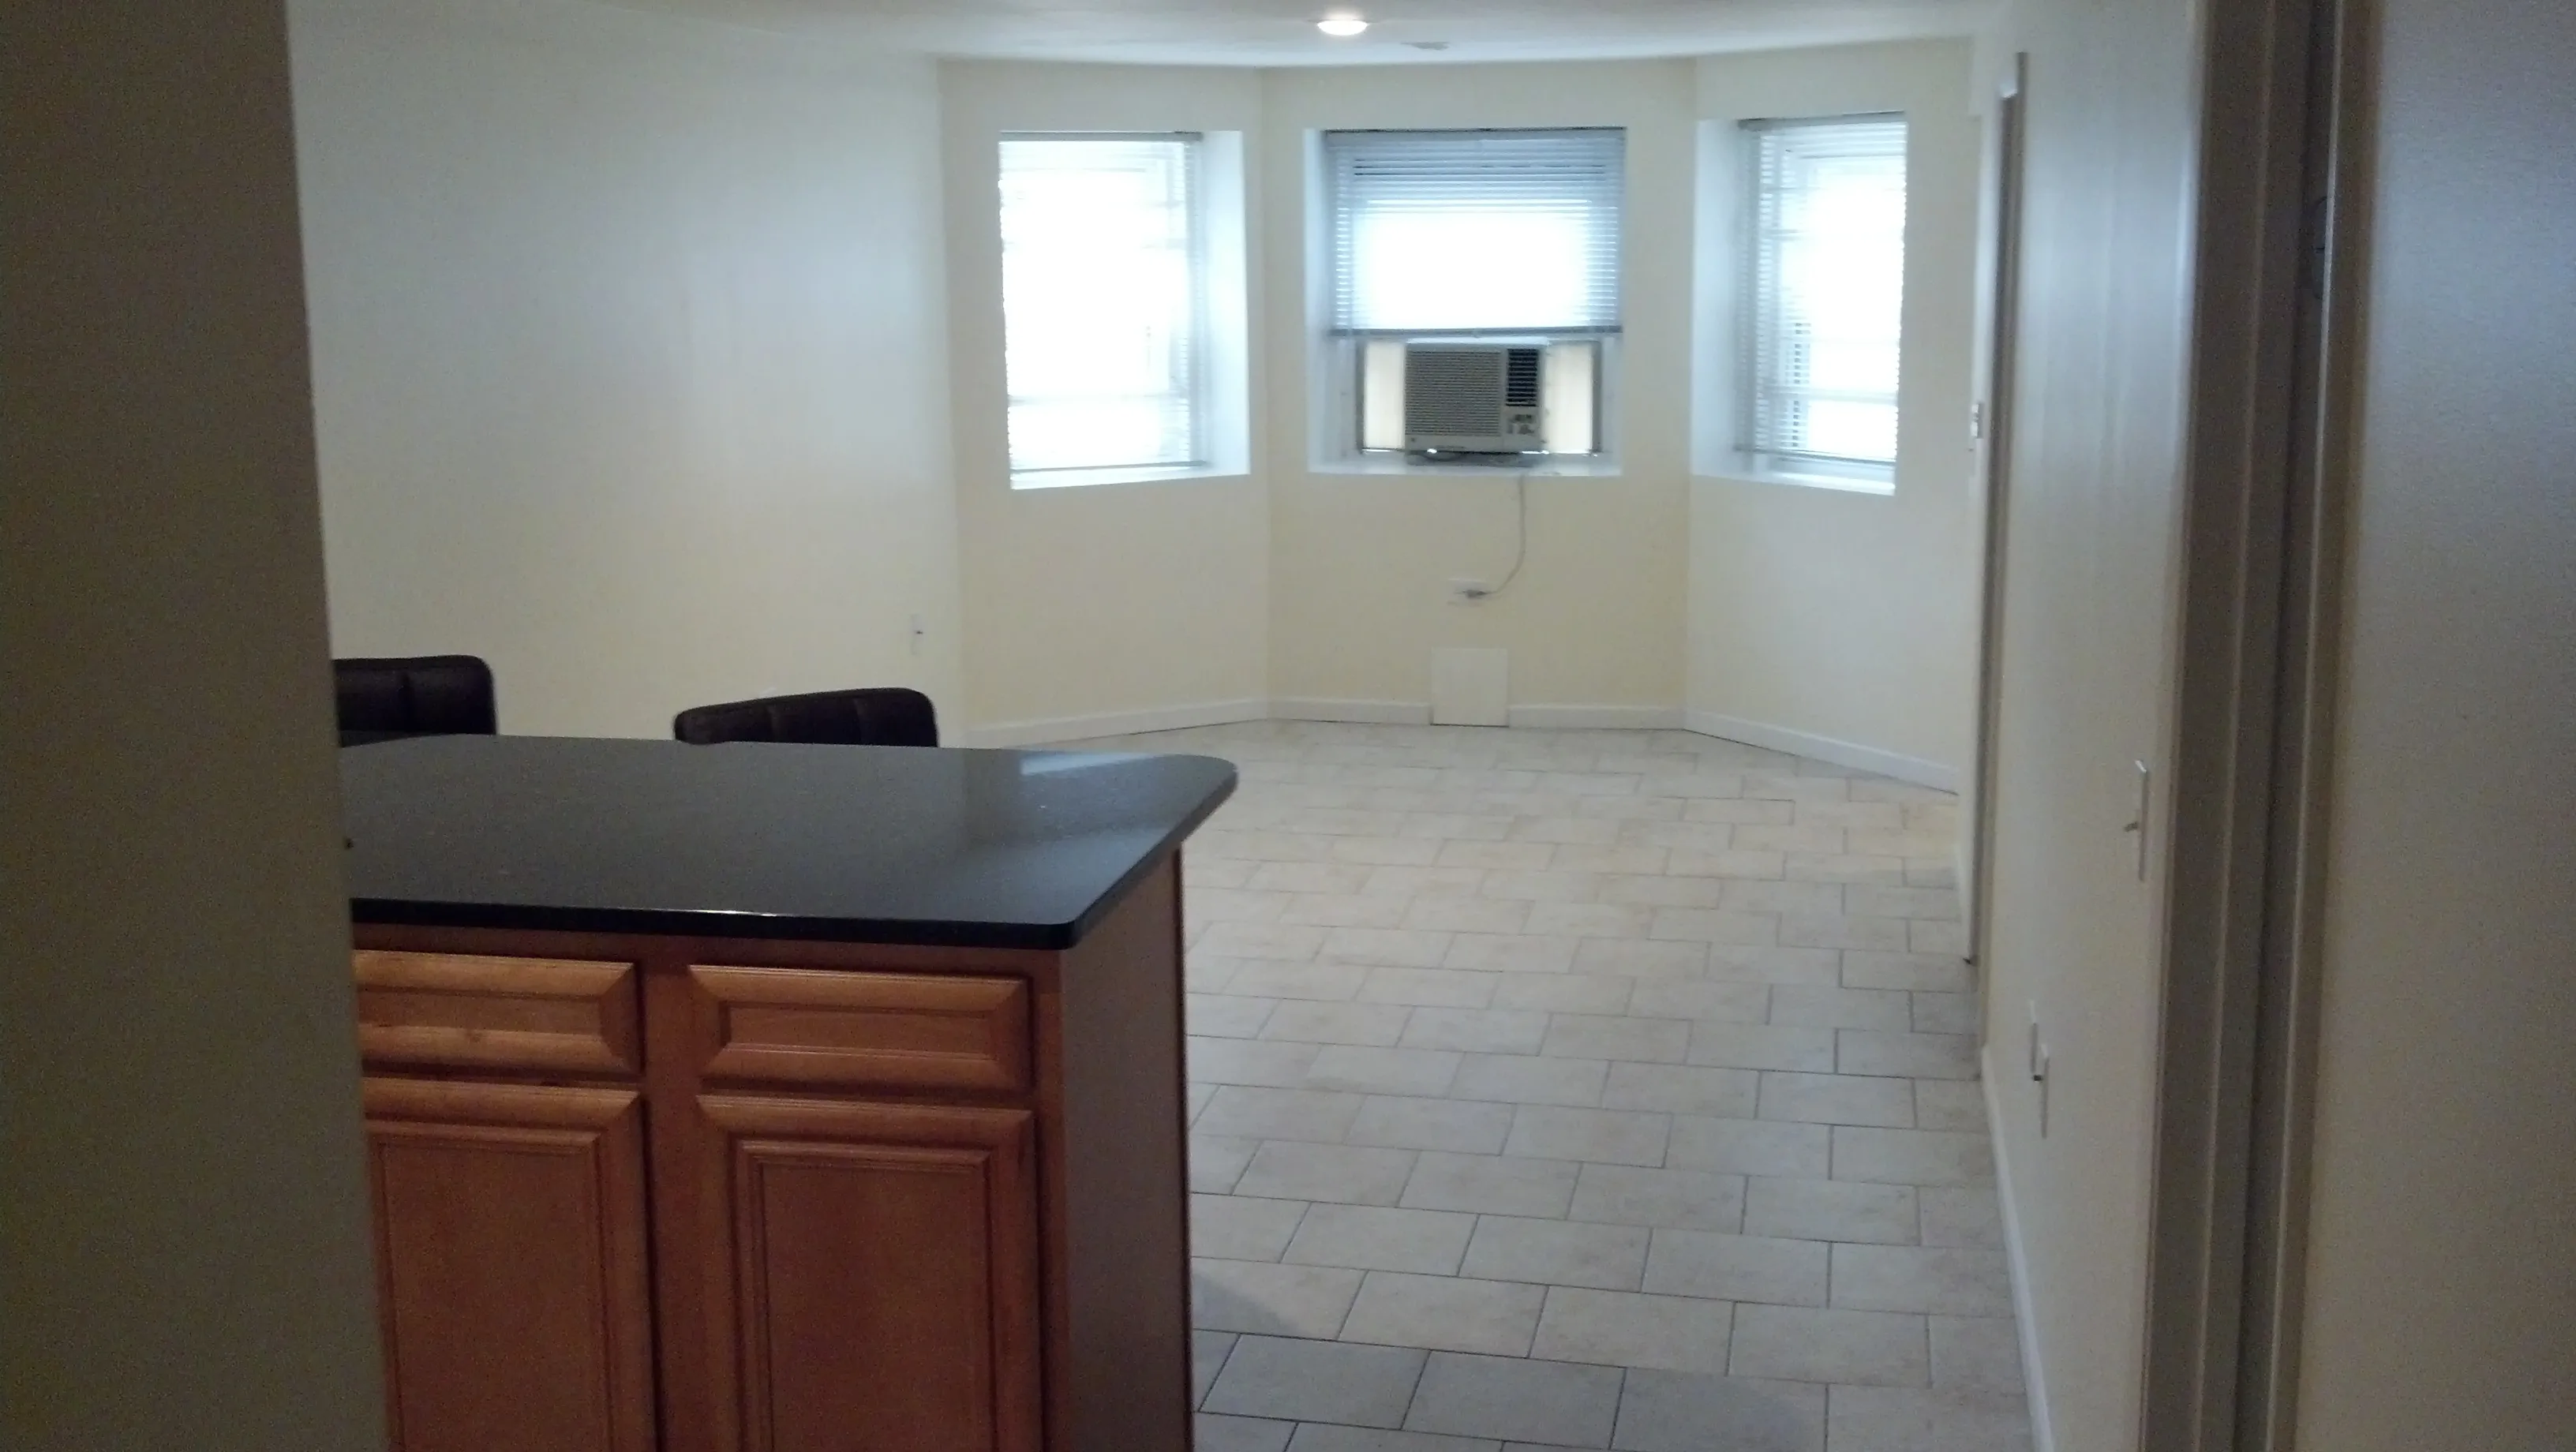 2143 N OAKLEY AVE 60647-Oakley Apartments-unit#1-Chicago-IL